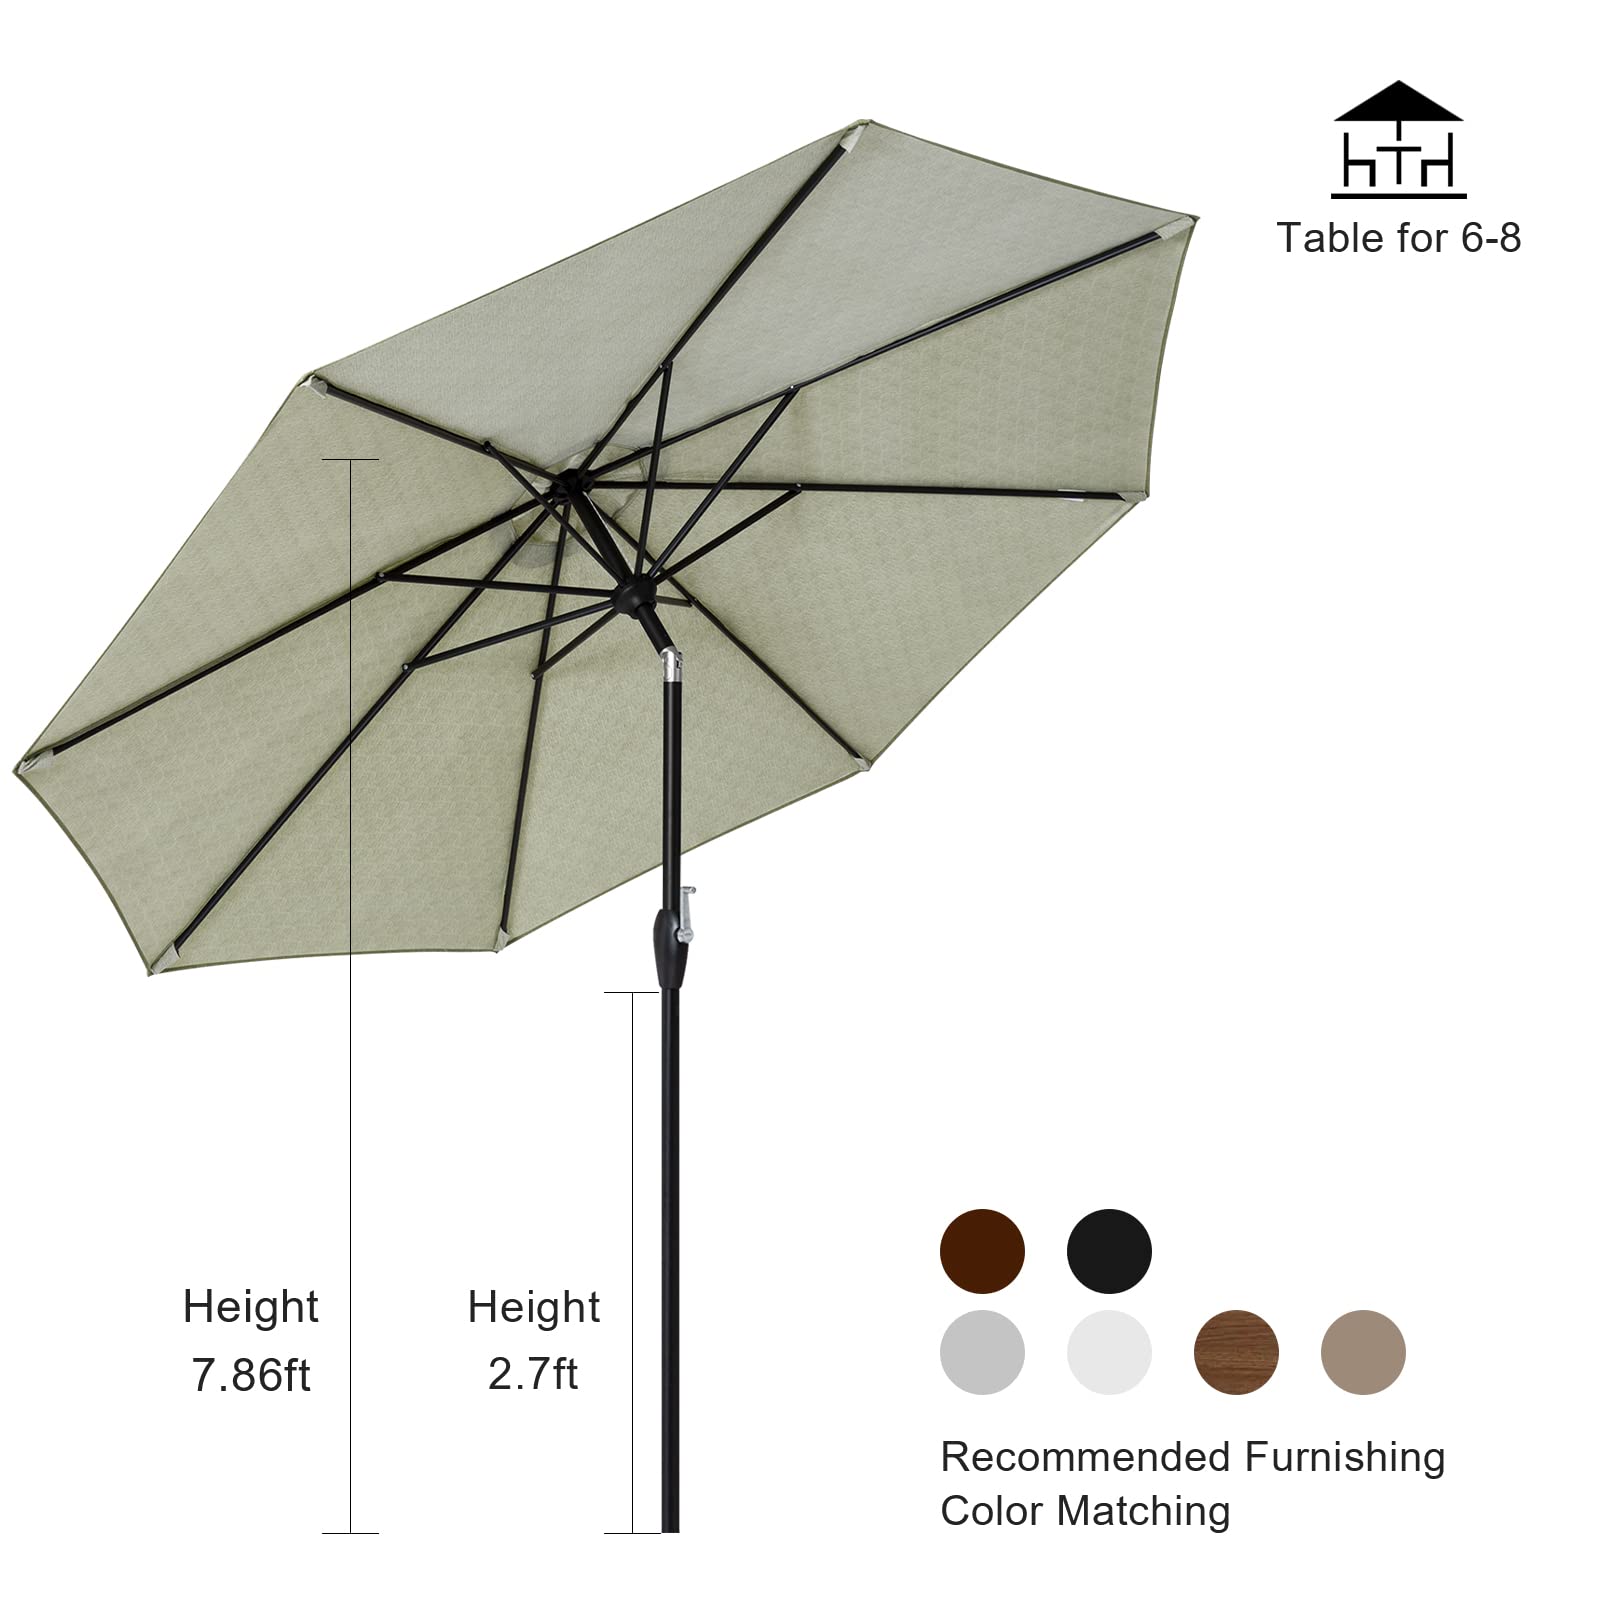 Tempera 9 ft Patio Umbrella Outdoor Table Market Umbrellas with 2-year Nonfading Canopy, 8 Sturdy Ribs and Push Button Tilt & Crank for Deck Pool Garden Lawn and Balcony